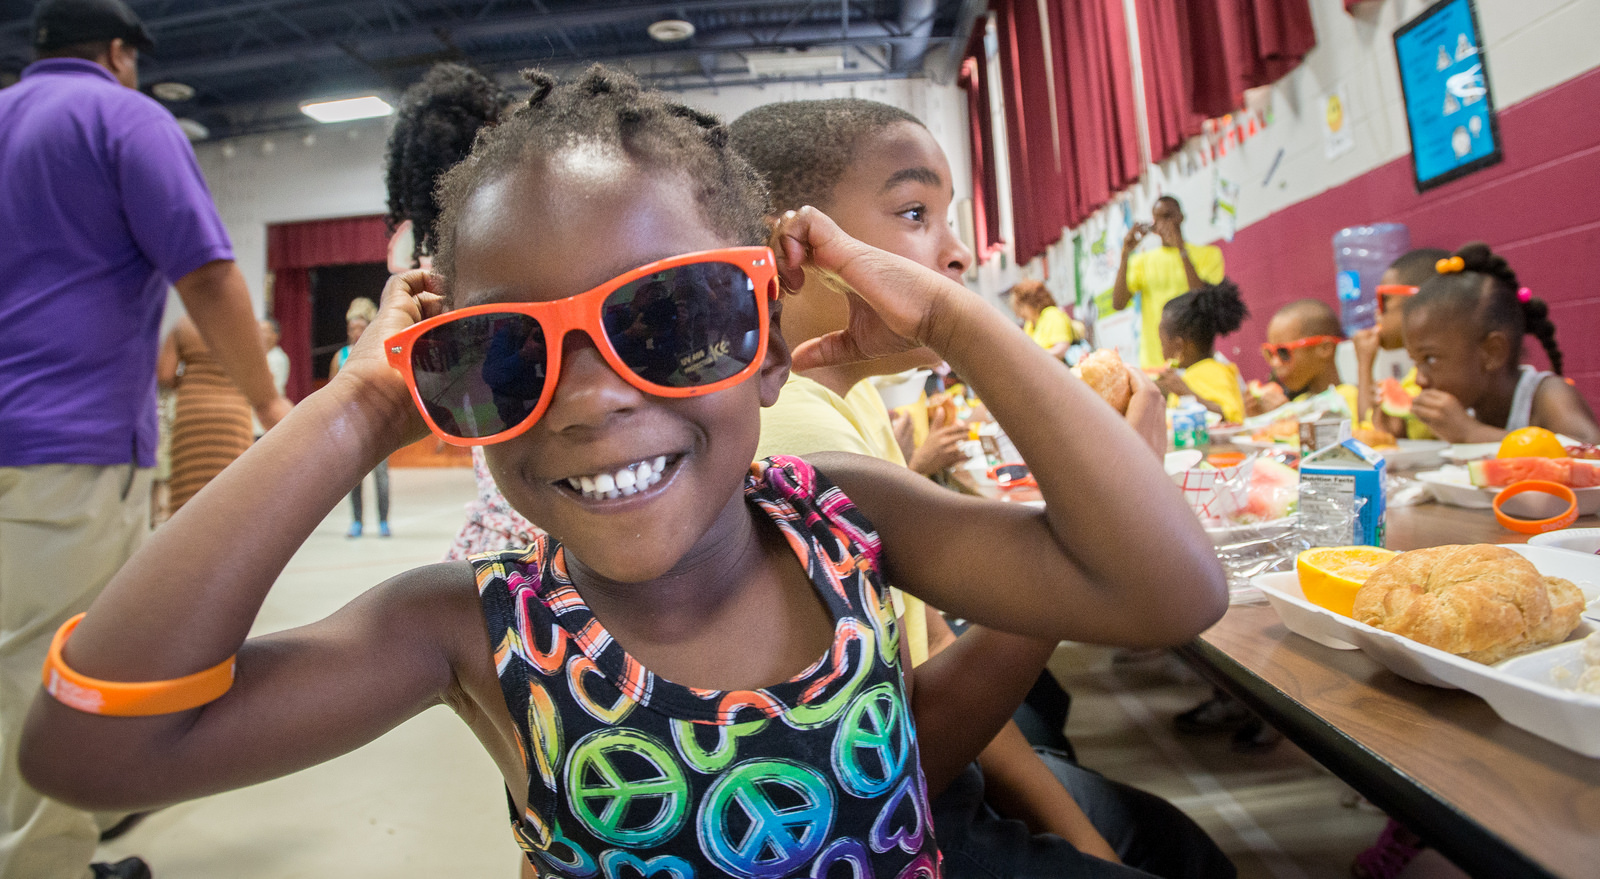 While summer means for time to play, for some children it means less to eat as they lose availability to school lunch programs. Some churches in Missouri are stepping up to fill in the gap. (Photo/USDA)